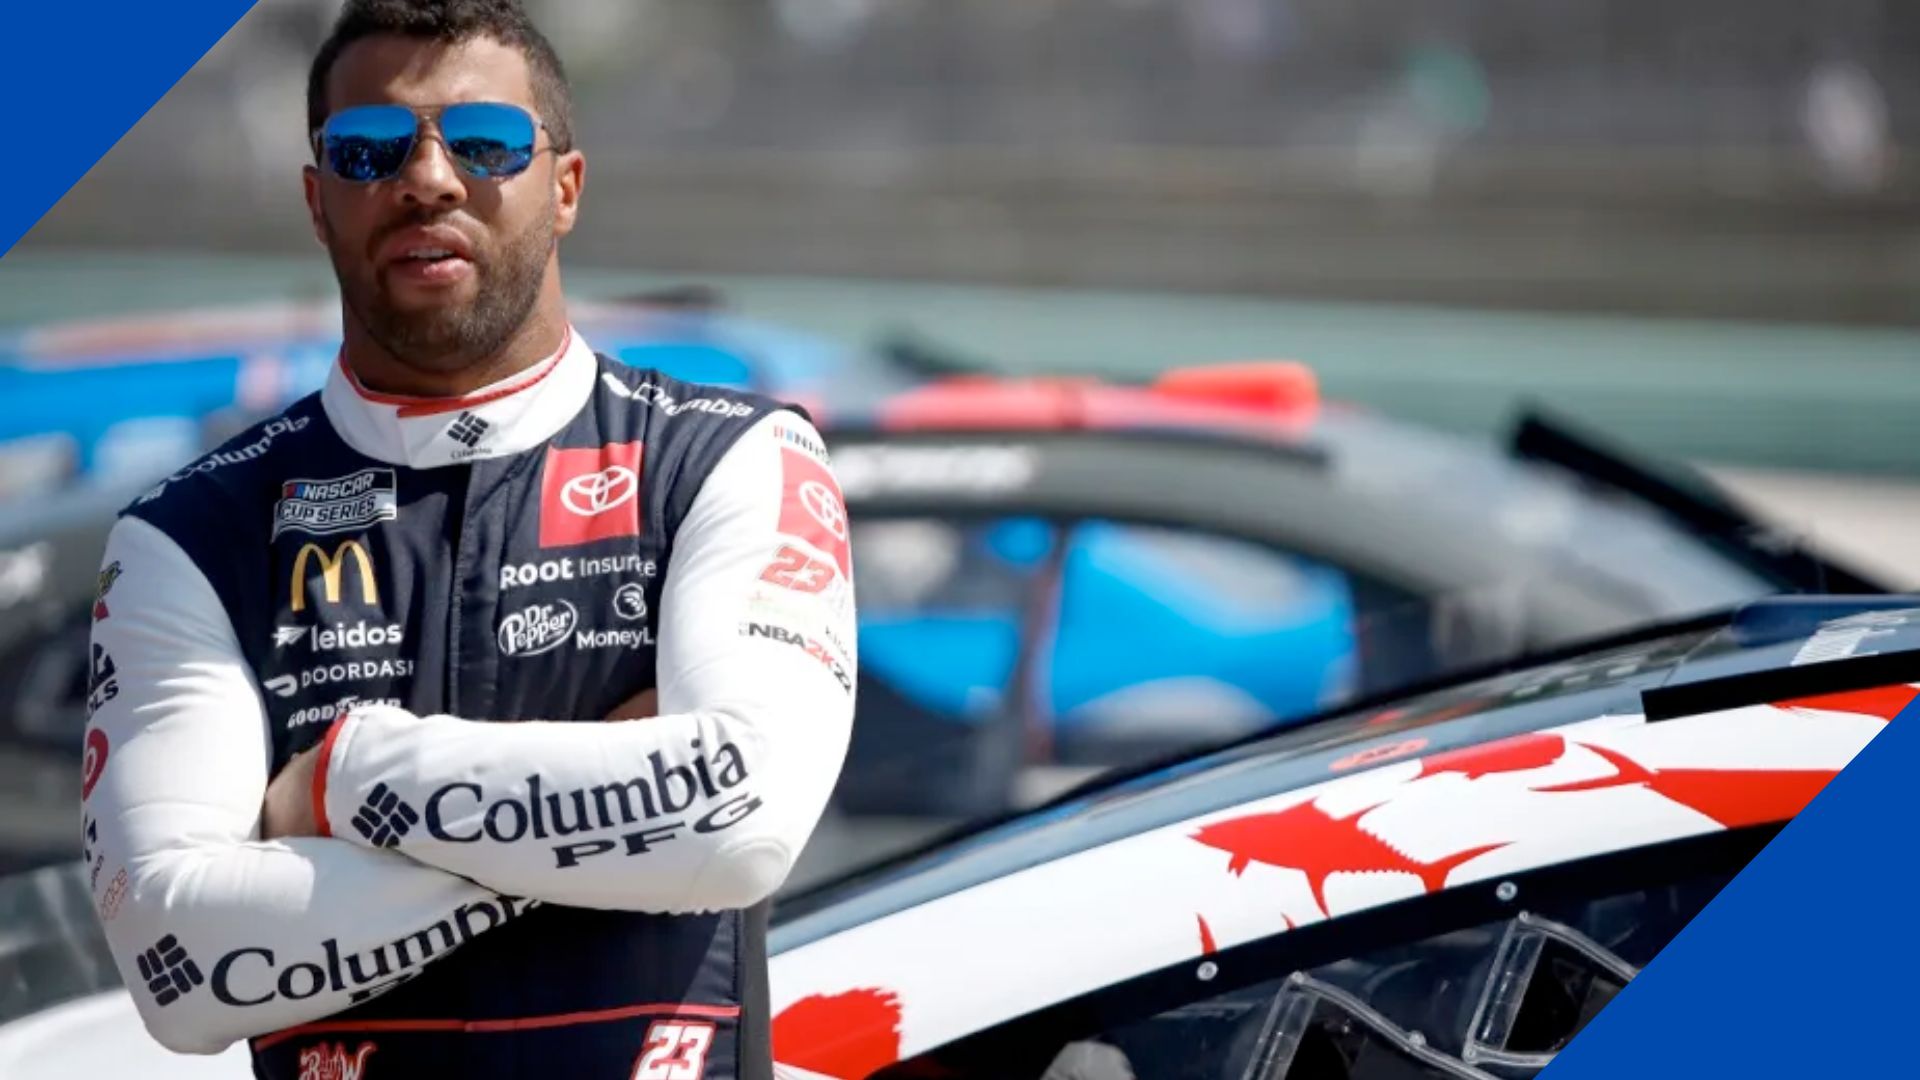 Bubba Wallace's Playoff Prospects Under Doubt